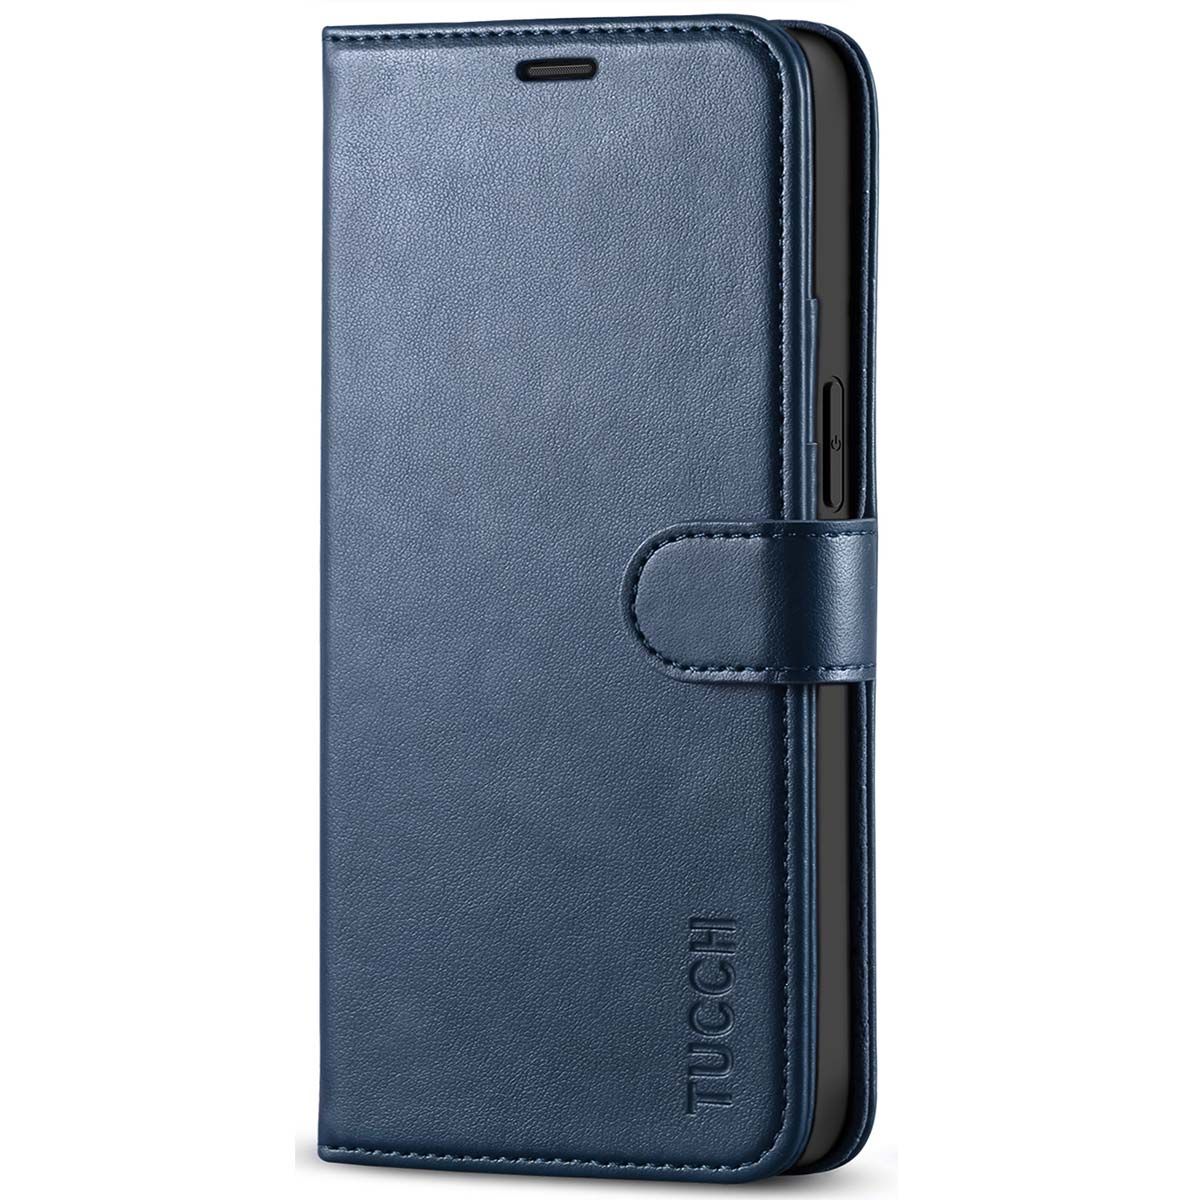 Tucch Iphone 12 Mini Wallet Case Blue Iphone 12 Mini Leather Cover Pu Leather Rfid Blocking Flip Folio Kickstand Magnetic Clasp